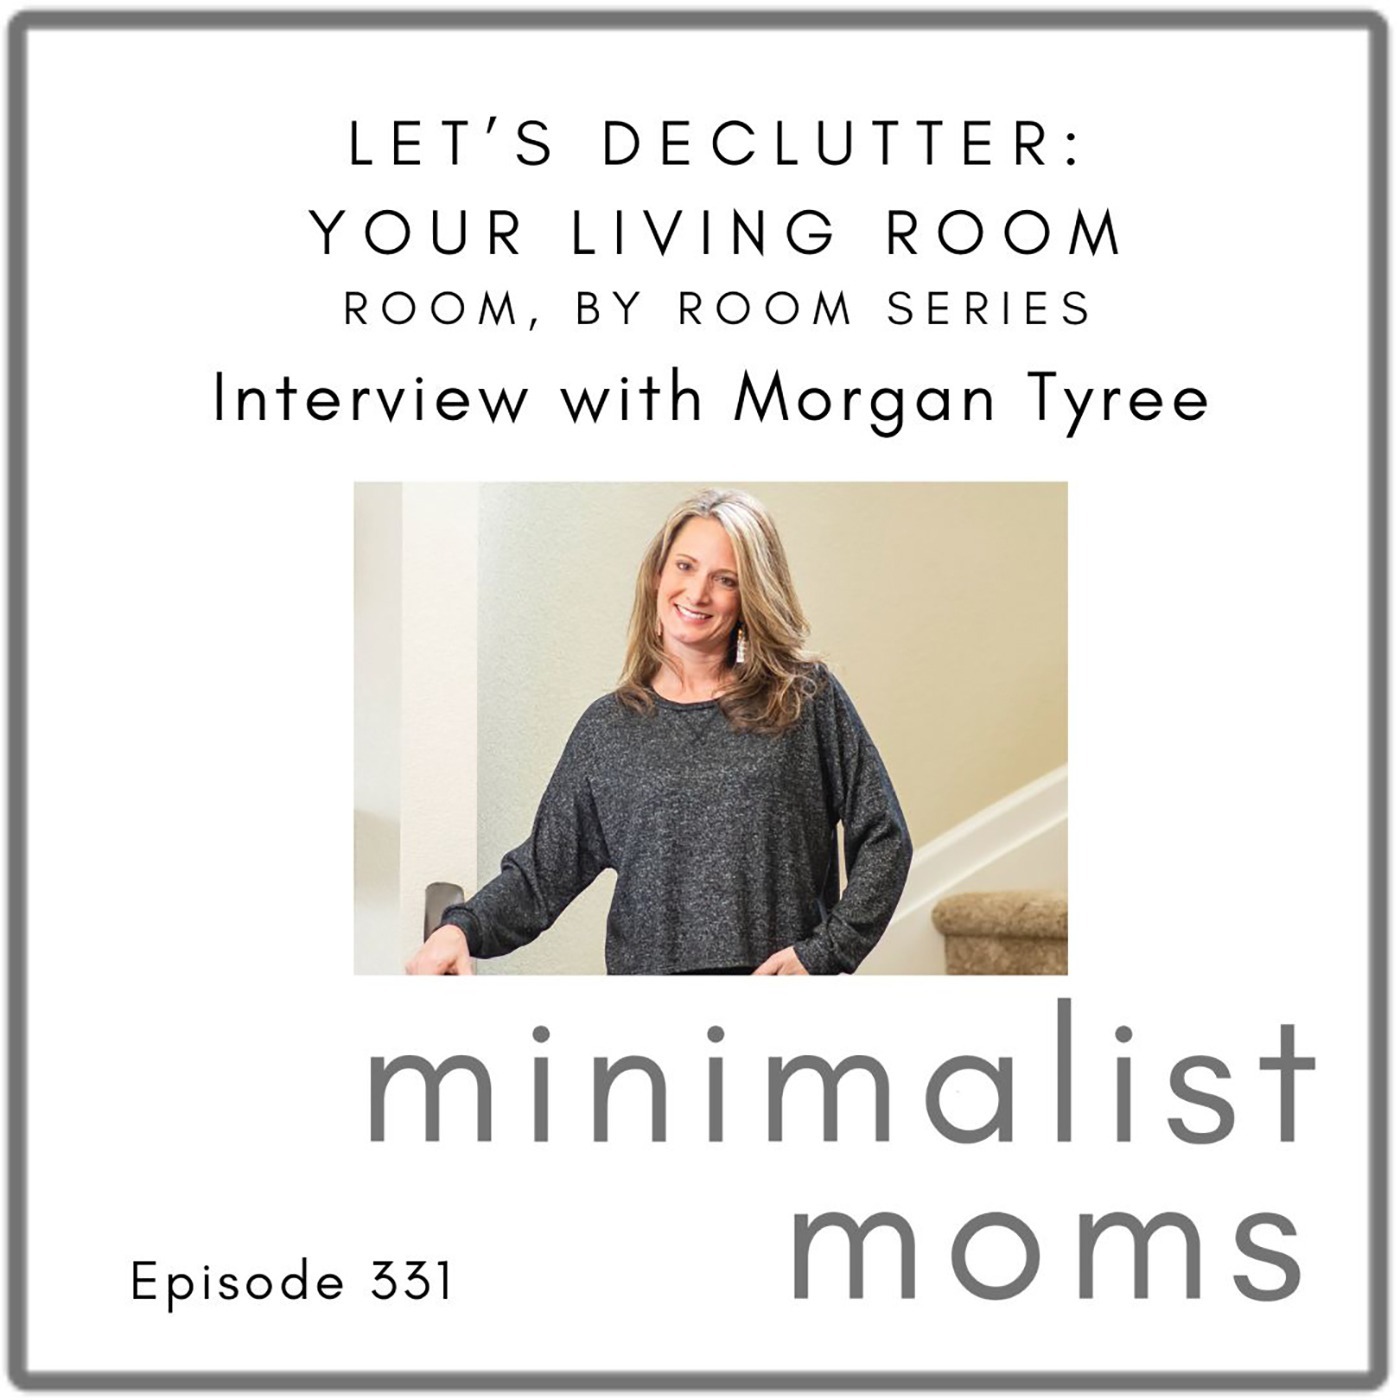 Let’s Declutter: Your Living Room with Morgan Tyree (EP331) [Room by Room Series]